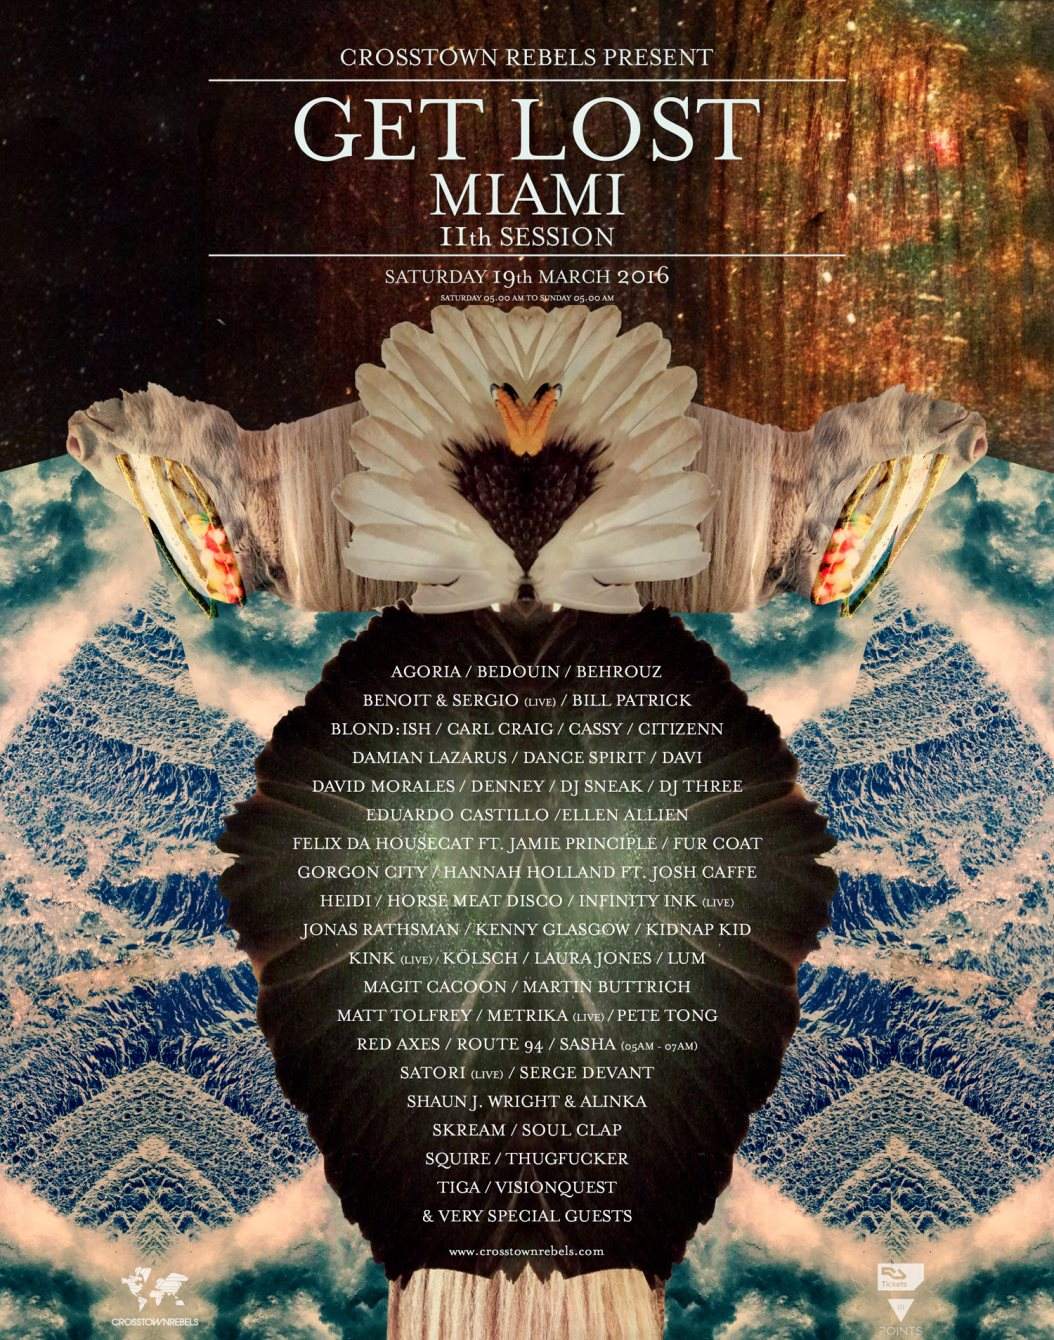 Crosstown Rebels present Get Lost Miami - 11th Session - Página frontal